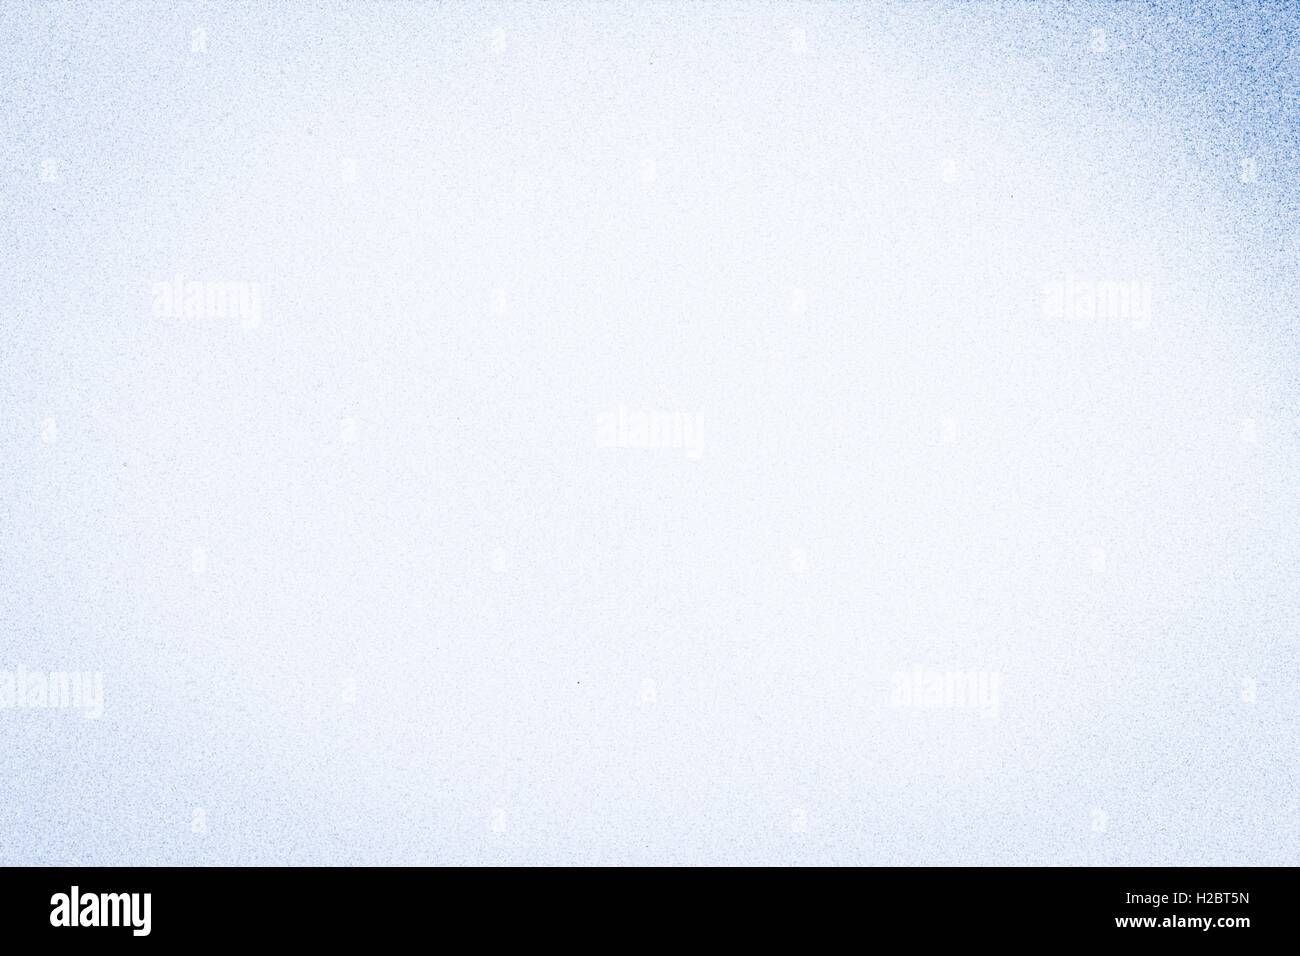 White and blue gradient background. Stock Photo